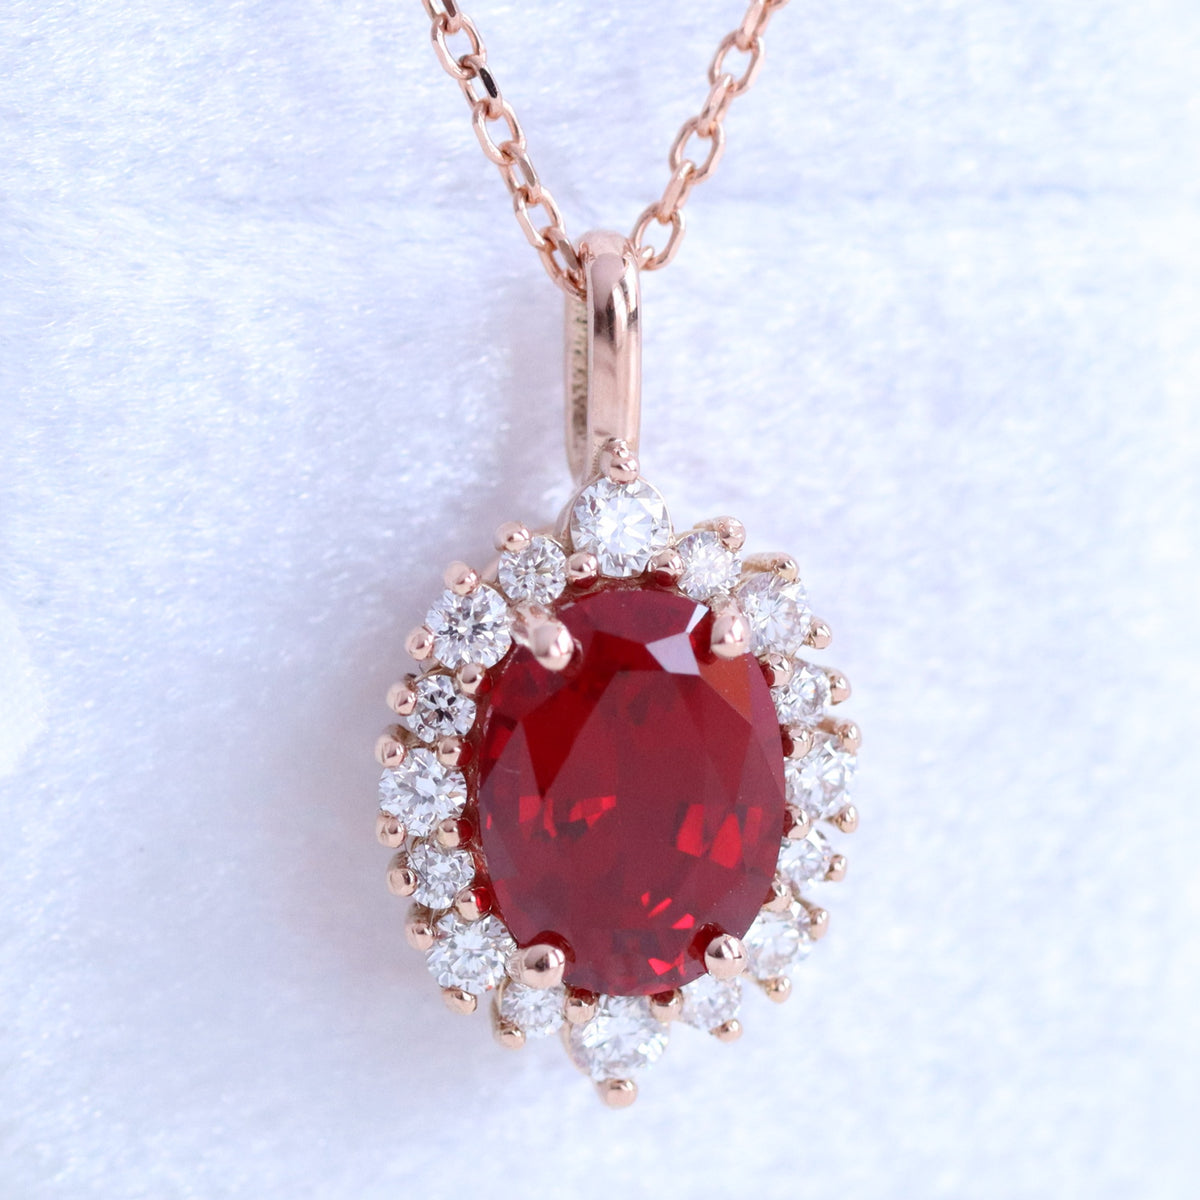 Oval ruby necklace rose gold halo style ruby diamond drop pendant necklace la more design jewelry